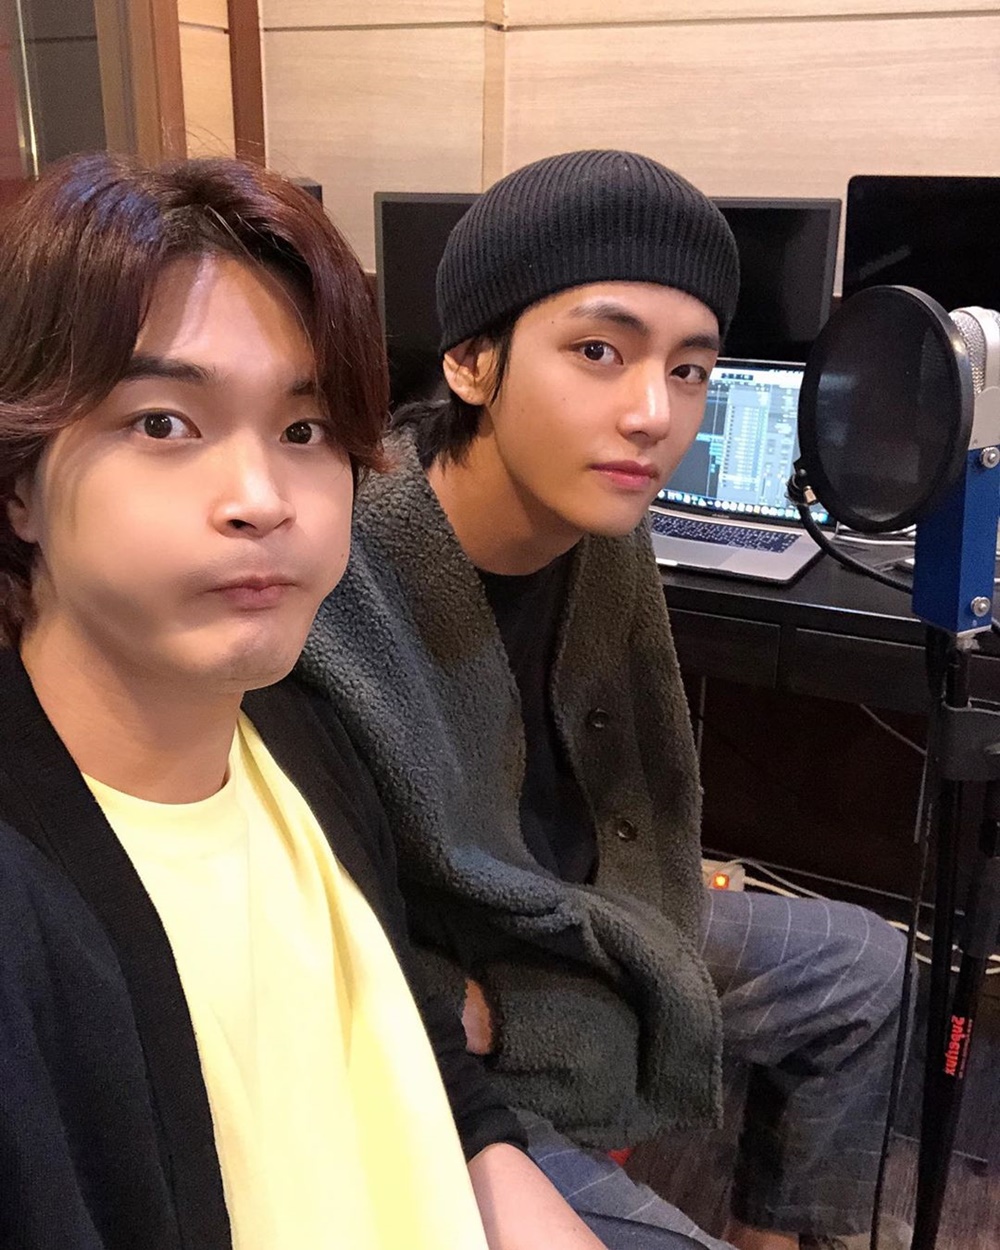 Producer and singer NIve has met with BTS (BST) V and is attracting global fans attention.According to 153 Entertainment (153 Entertainment), Nib recently joined BTS V and Bangkok Challenge to begin his impromptu composition Battle.Especially, the video of the two people working together was posted on the official SNS of BTS, and it became a hot topic among fans around the world.The meeting between Nib and V was made by Nibs best friend, Paul Kim.V, who usually enjoys Nibs music, asked Paul Kim to meet and had a chance to naturally build up a friendship.Since then, V and Nib have spent meaningful time playing an impromptu compositional match, and expectations are also focused on whether the two will achieve a duet in the future.As Nib meets V, which has been influential all over the world, many netizens are curious and interested in Nib.In fact, netizens responded with a hot response, leaving comments such as Who is this person? And I can not believe it is improvisation, I want you to give it to the music source.Nib, who is gathering attention as a composition partner of V, was in front of the public under the name Brian Park on the top 9 of Superstar K6 broadcast in 2014, and started his career as the first artist of 153 Entertainment.Nive, who has been performing steady musical activities under the real name of Park Ji-soo, has been performing the title song EXO Chen Solo deV album We break up after April, EXO Dance, Like the Rain Day by Jeong Se-un, Paul Kim New Day, Why My Spring, SAM KIM Wheres My Money It is a talented Lee Su-hyun who produced a number of songs in various genres such as HYNN (Park Hye-won) mini album title songs, No matter what, Goodbye and To Today (TO.DAY).In receiving such a love call from many Lee Su-hyuns, Nib also got the modifier Lee Su-hyun, which Lee Su-hyun recognized.Earlier this month, he released a domestic deV single Like a Fool, which was collaborated with SAM KIM, and got a hot response.Like a Fool is a song that leaves a calm and deep aftertaste due to the unique tone of Nib and SAM KIM, and it has attracted attention with its good performance, including the top of major music sites in Korea at the same time as it was released.The first step of domestic activities has been successfully taken by Nib, and music fans around the world are attracting attention.Photo: 153 Entertainment/153 Zumbas Music Group